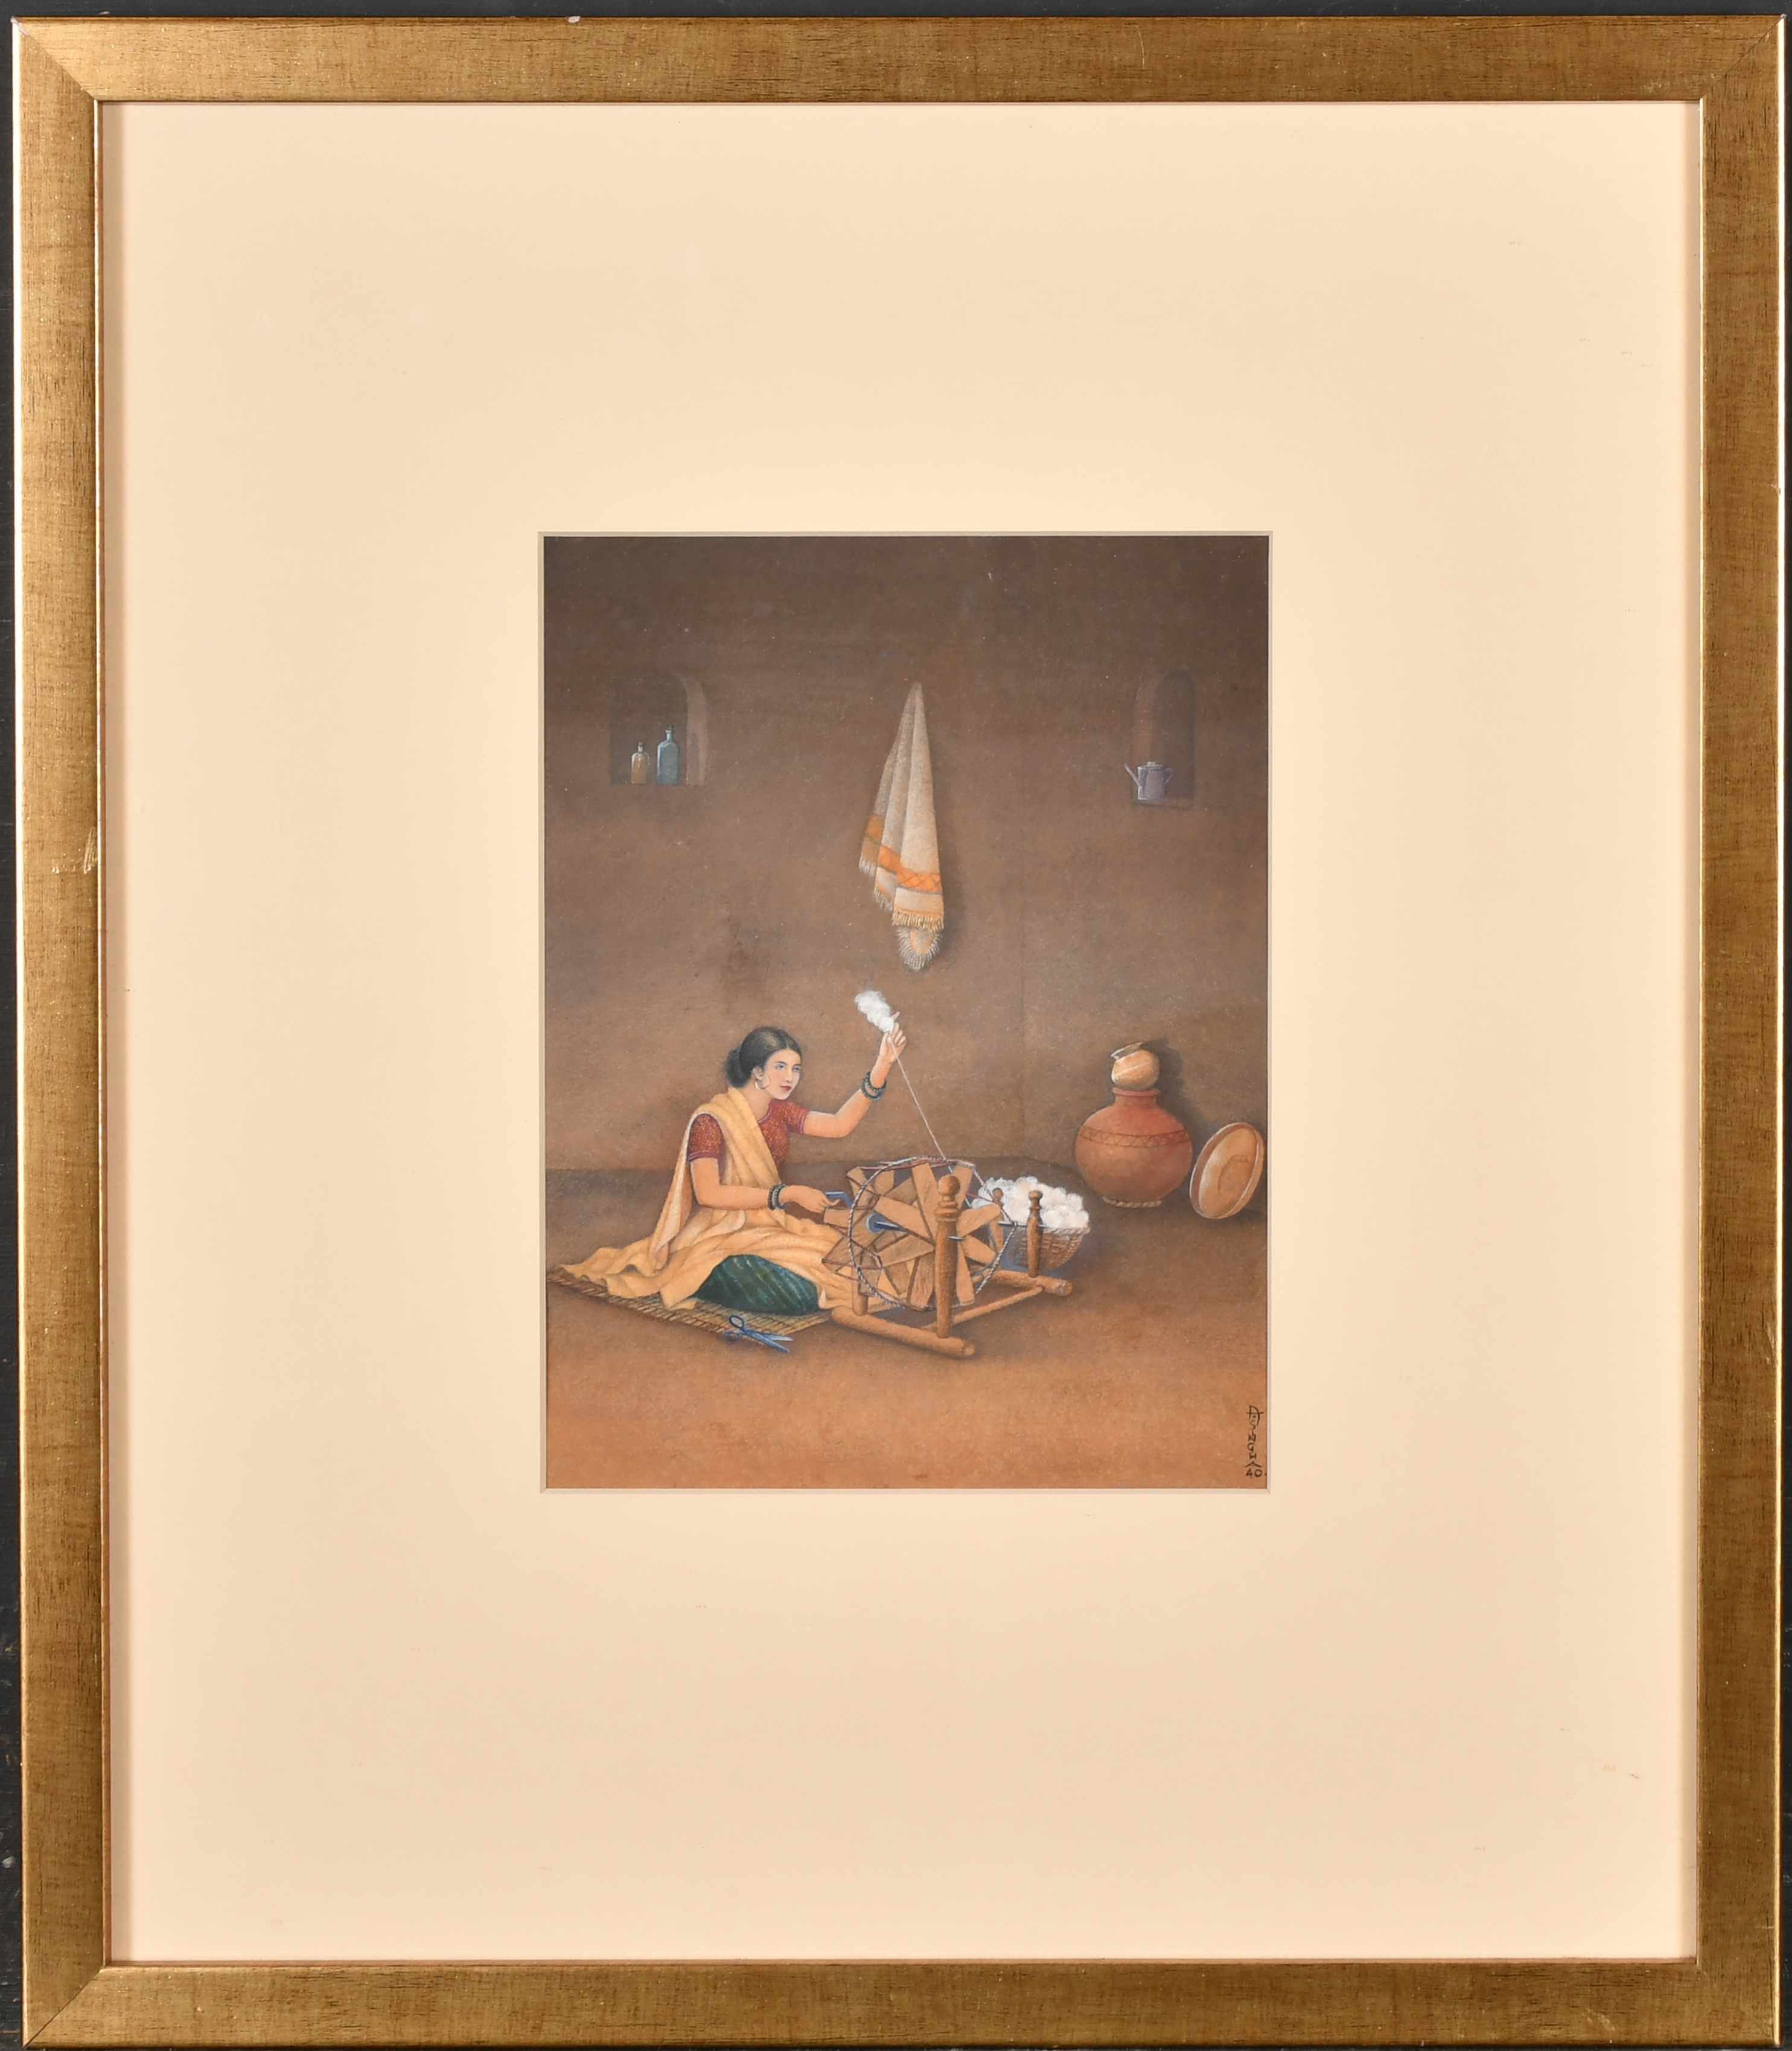 A Singh (20th Century) Indian. An Indian Girl Weaving, Watercolour, Signed and dated '40, 8.25" x - Image 2 of 4